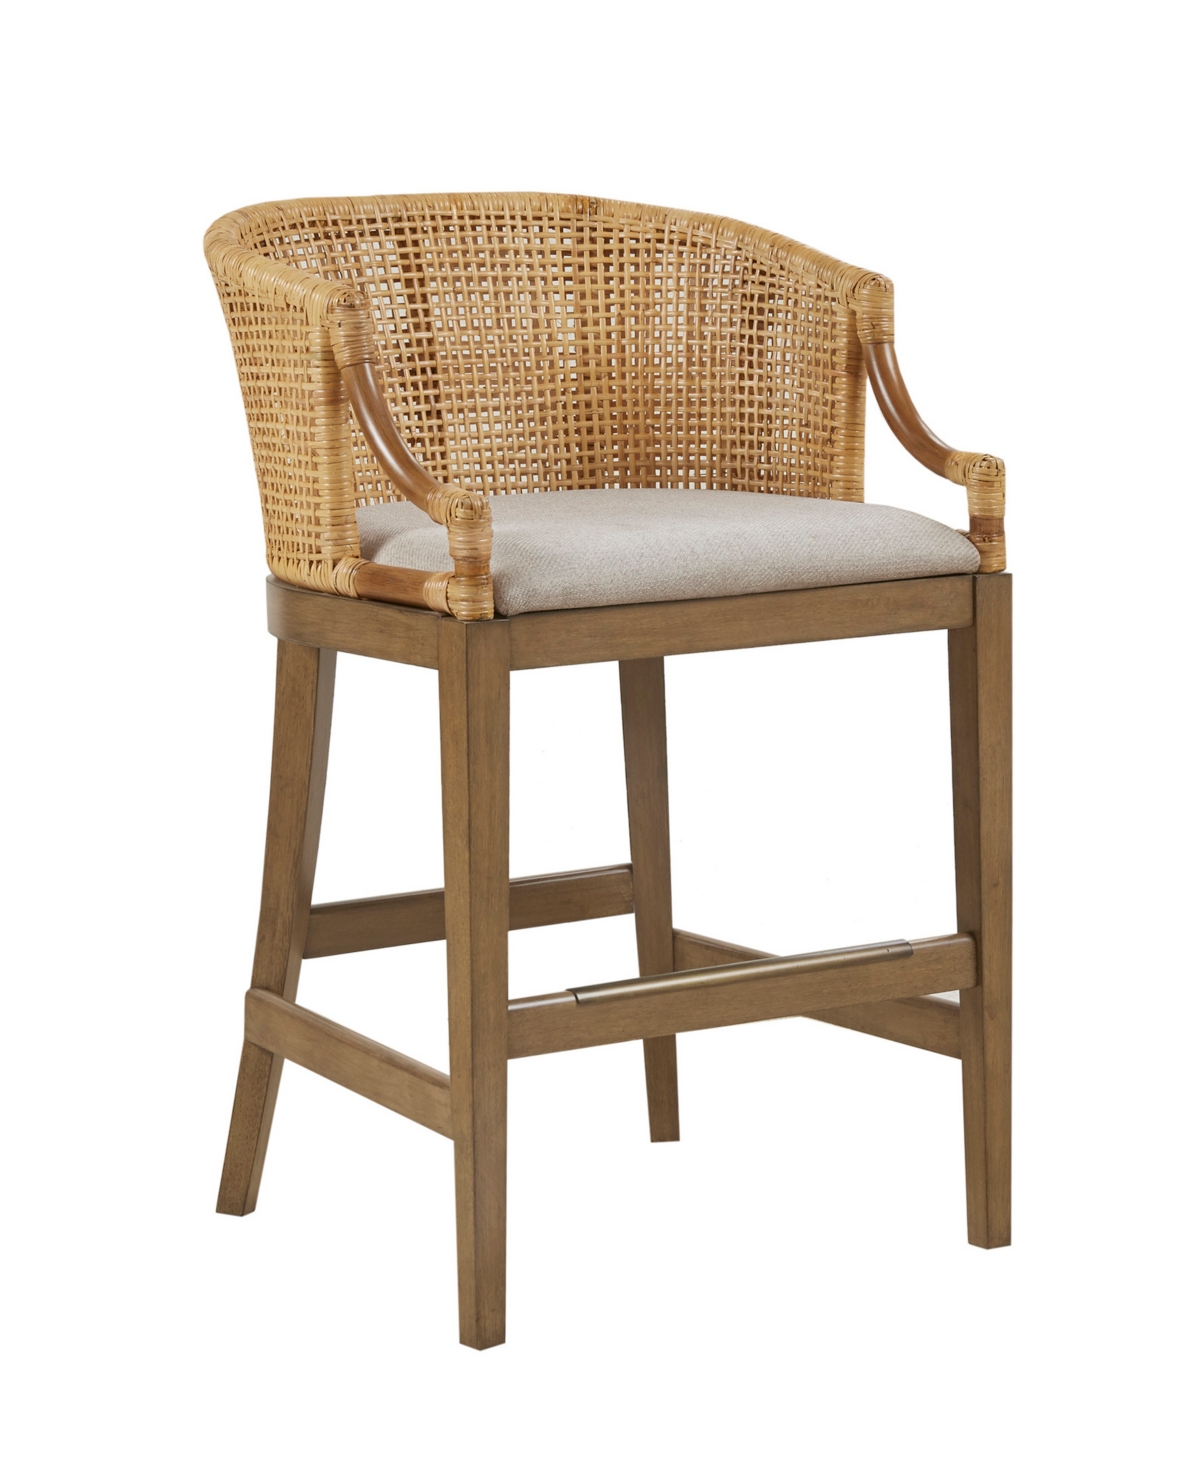 Martha Stewart Collection Playa 25" High Handcrafted Rattan Counter Stool In Natural